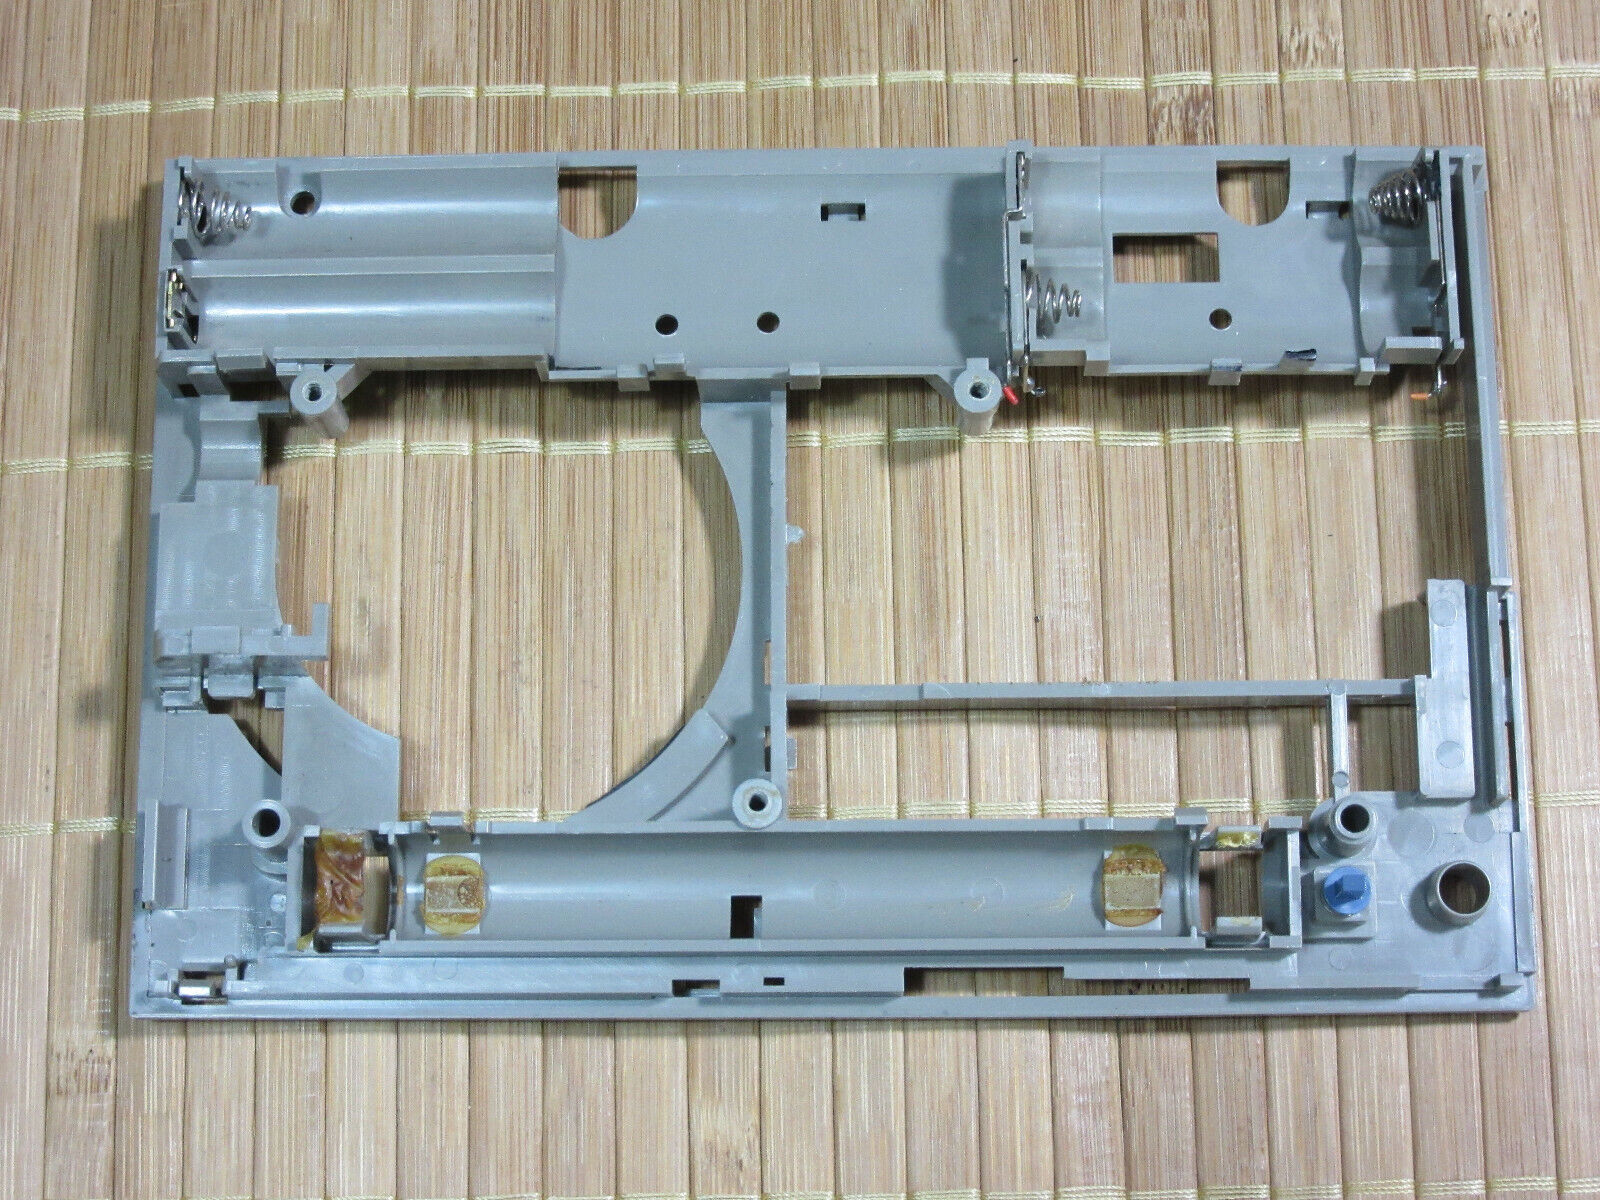 SONY ICF-7600D TOP WORLD BAND RECEIVER PARTS: INNER CHASIS.